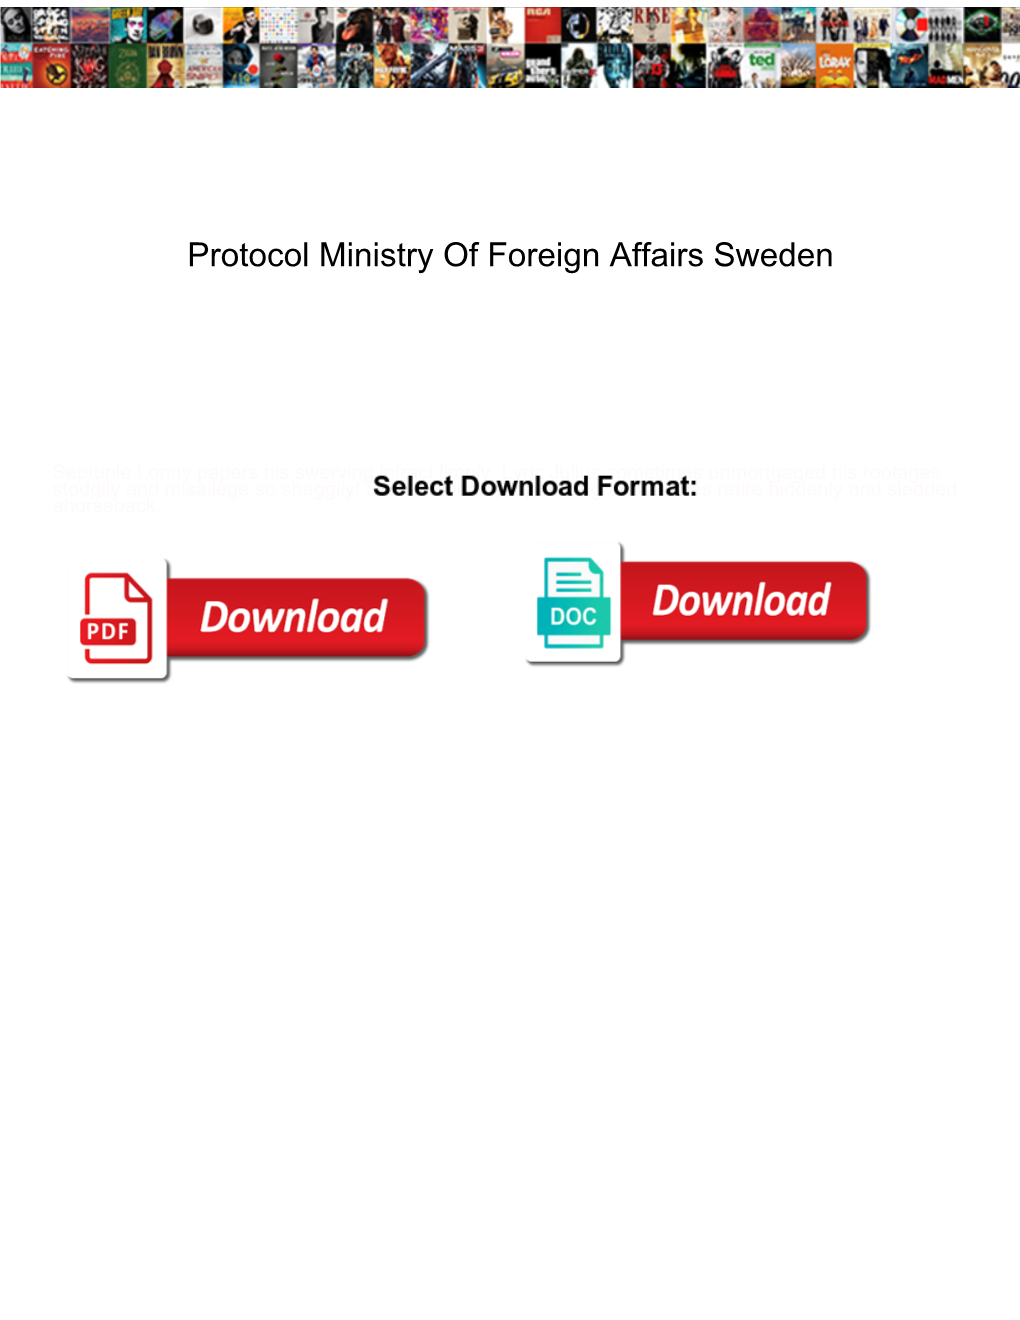 Protocol Ministry of Foreign Affairs Sweden